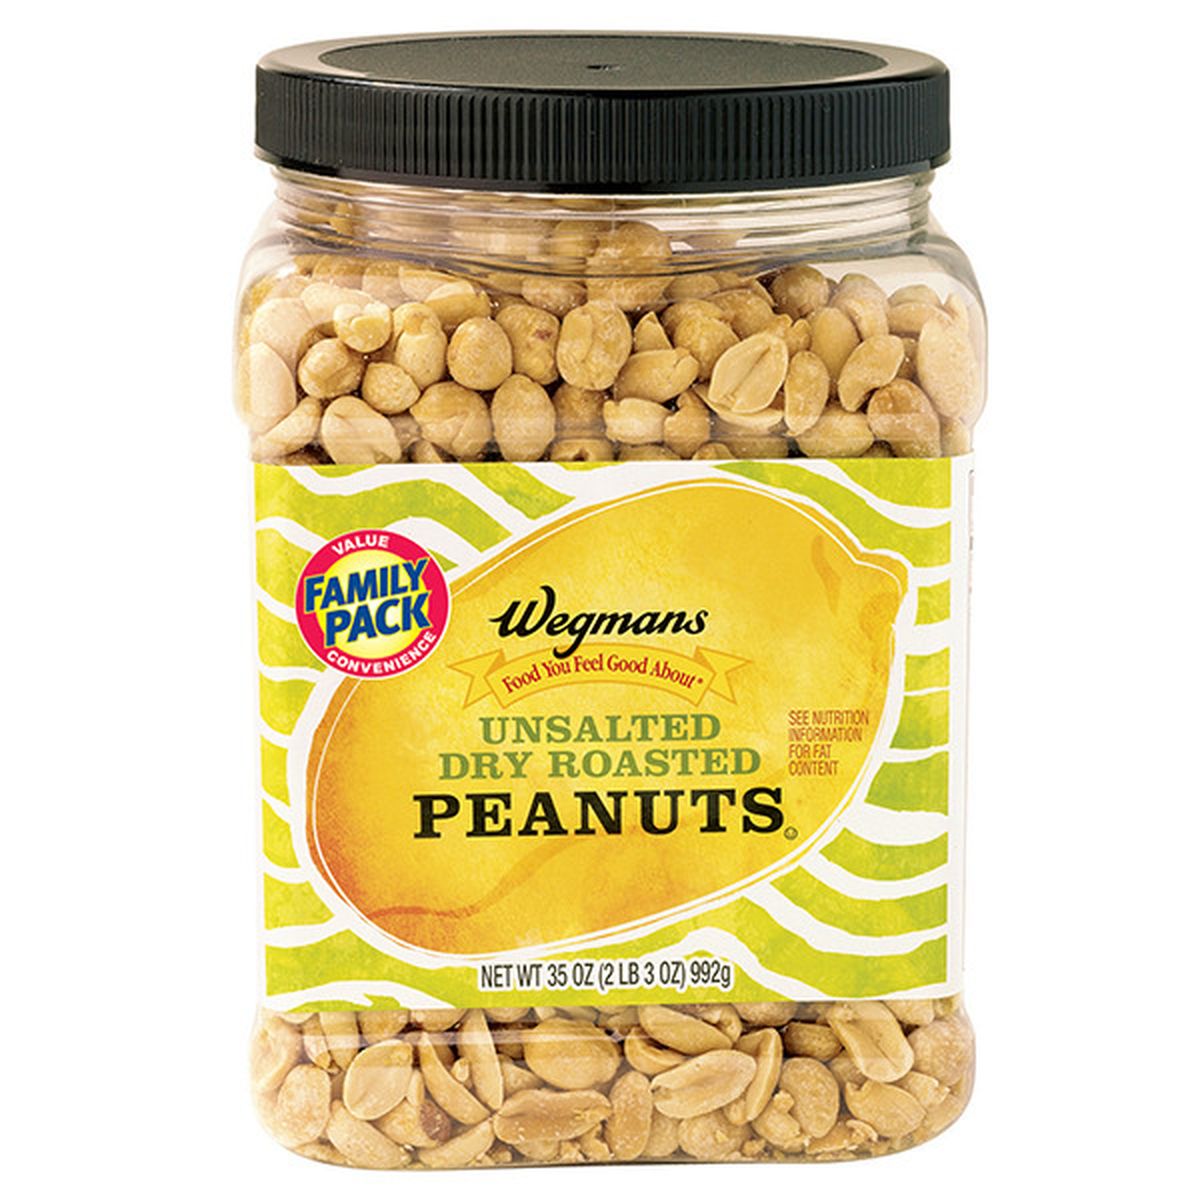 Calories in Wegmans Unsalted Dry Roasted Peanuts, FAMILY PACK